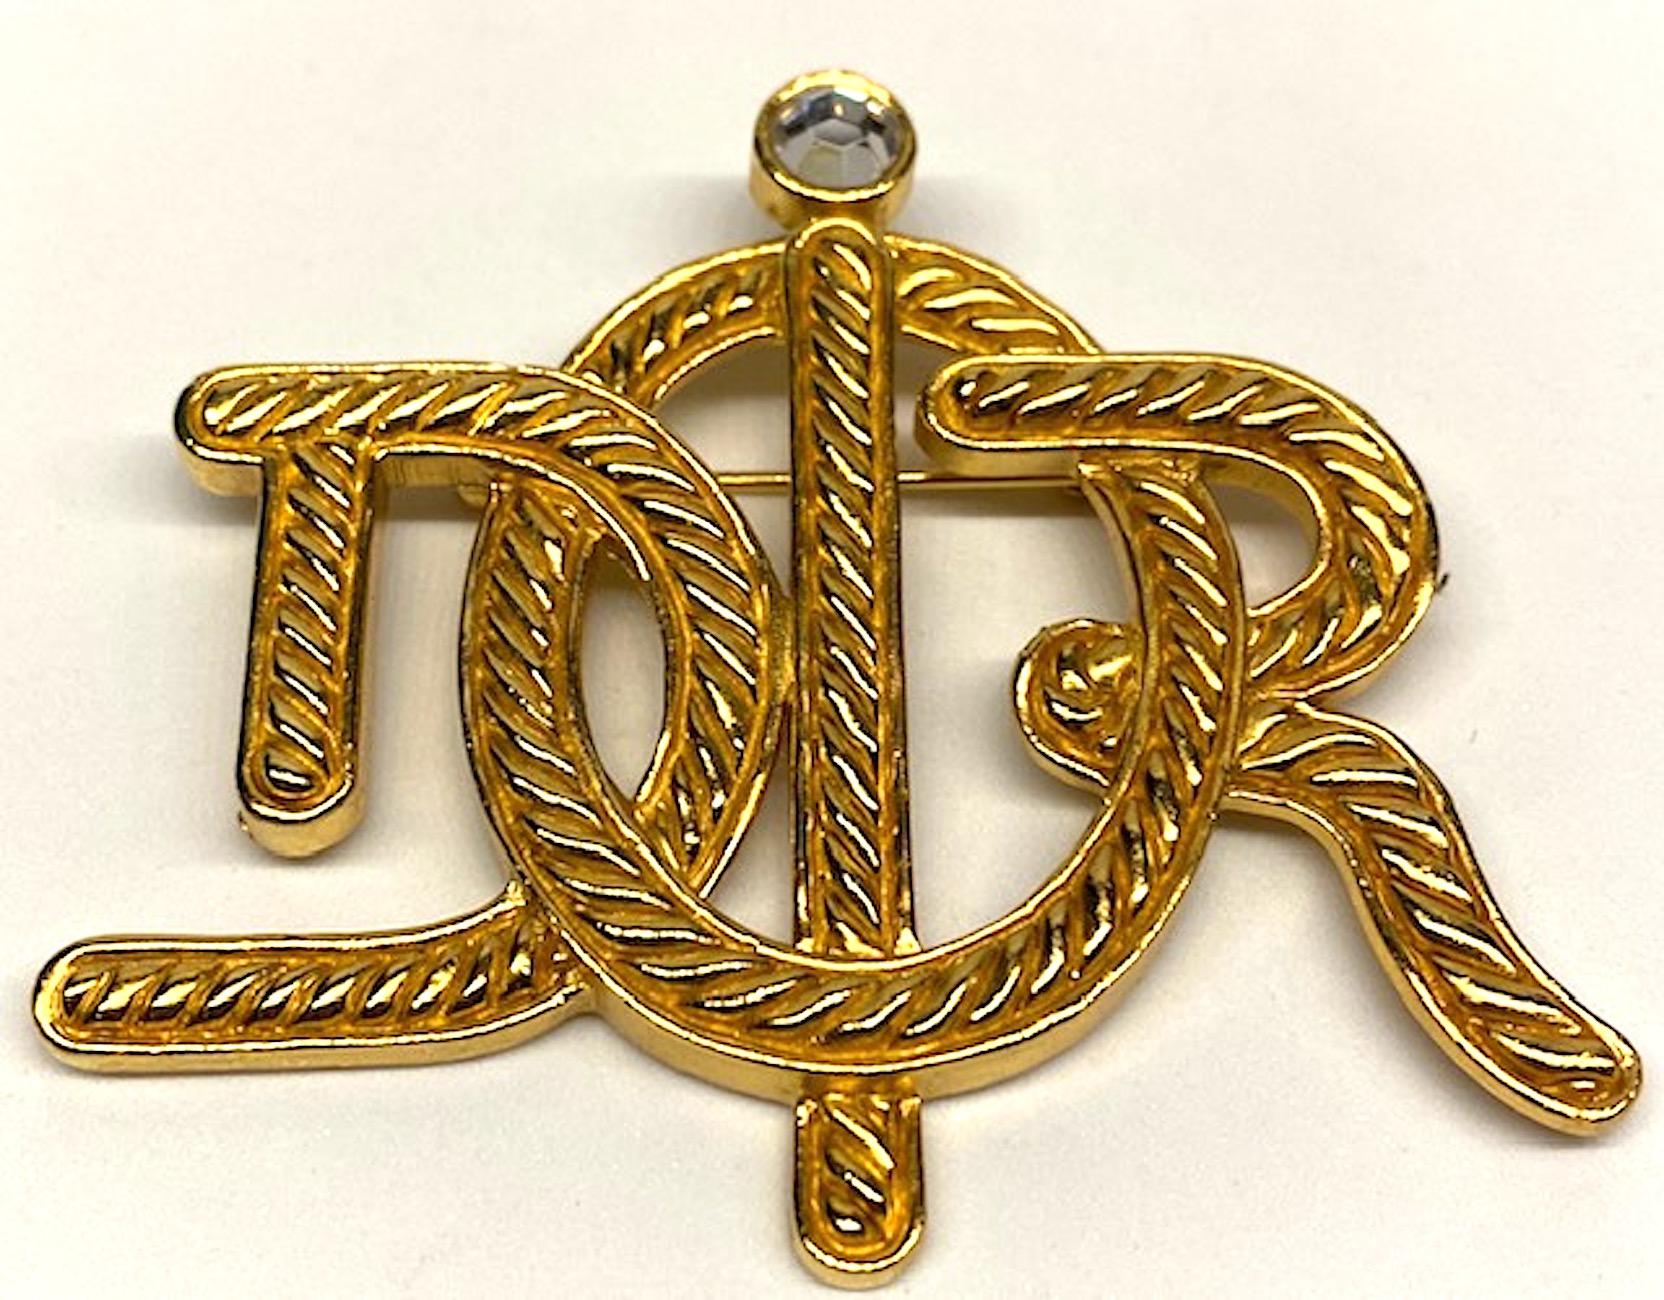 Dior gold tone monogram pin from the mid 1980s. A rope twist with smooth frame work design spells out the Dior name in a monogram or insignia style. The 